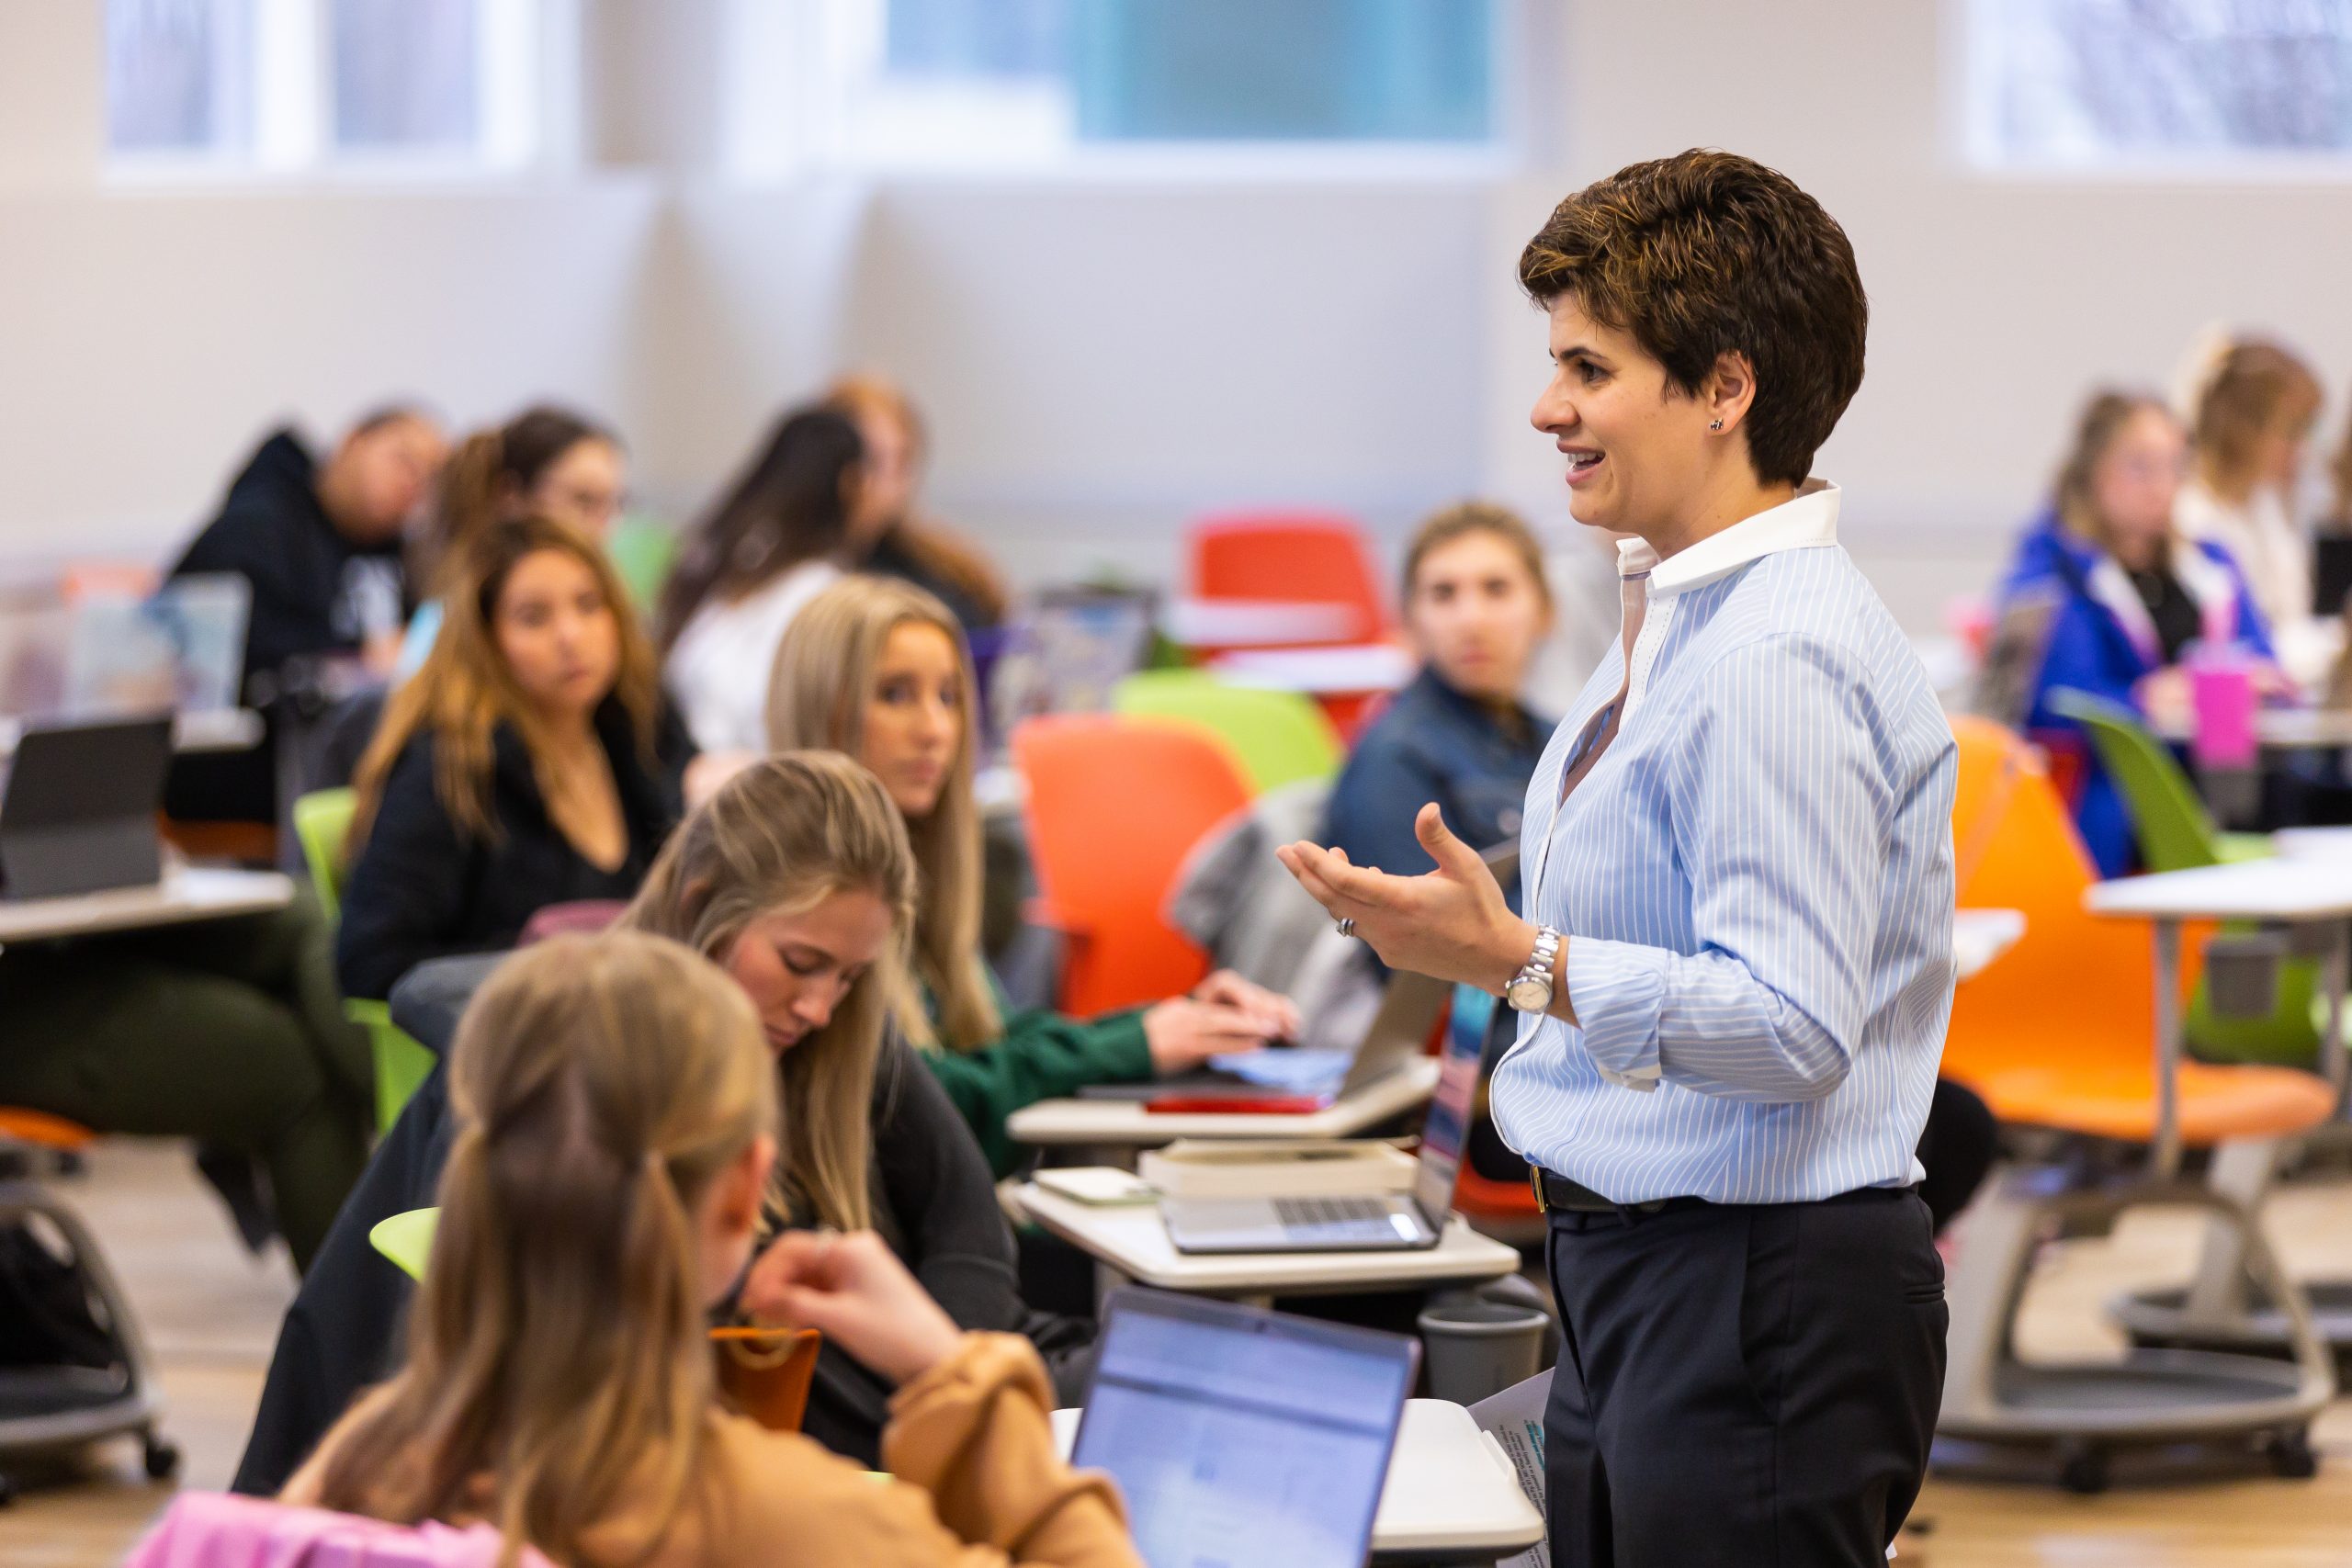 Phrosini Samis-Smith ’06 M.S., D.H.Ed., assistant dean for health professions and assistant professor of healthcare leadership at Valpo's College of Nursing and Health Professions, standing in front of and lecturing a vibrant, colorful classroom full of sitting students on campus.